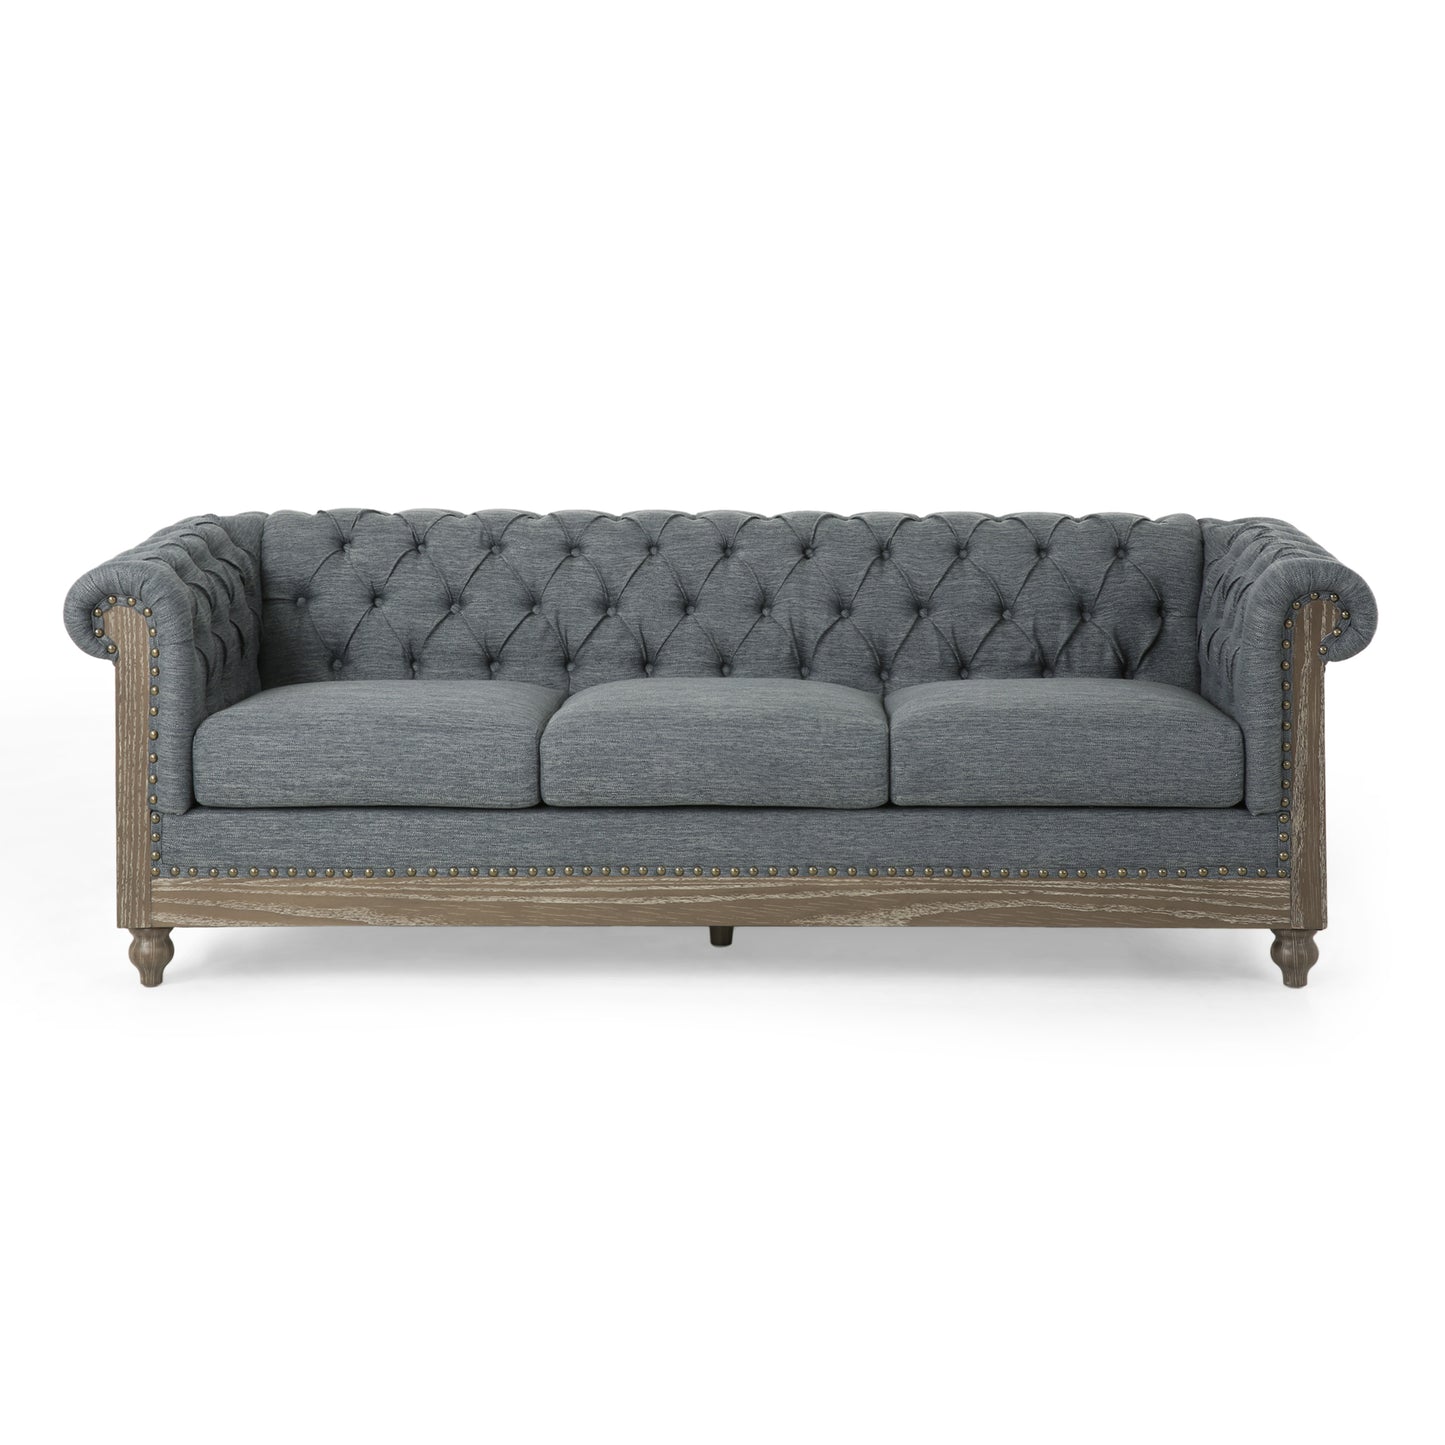 Bowes Chesterfield Tufted 3 Seater Sofa with Nailhead Trim